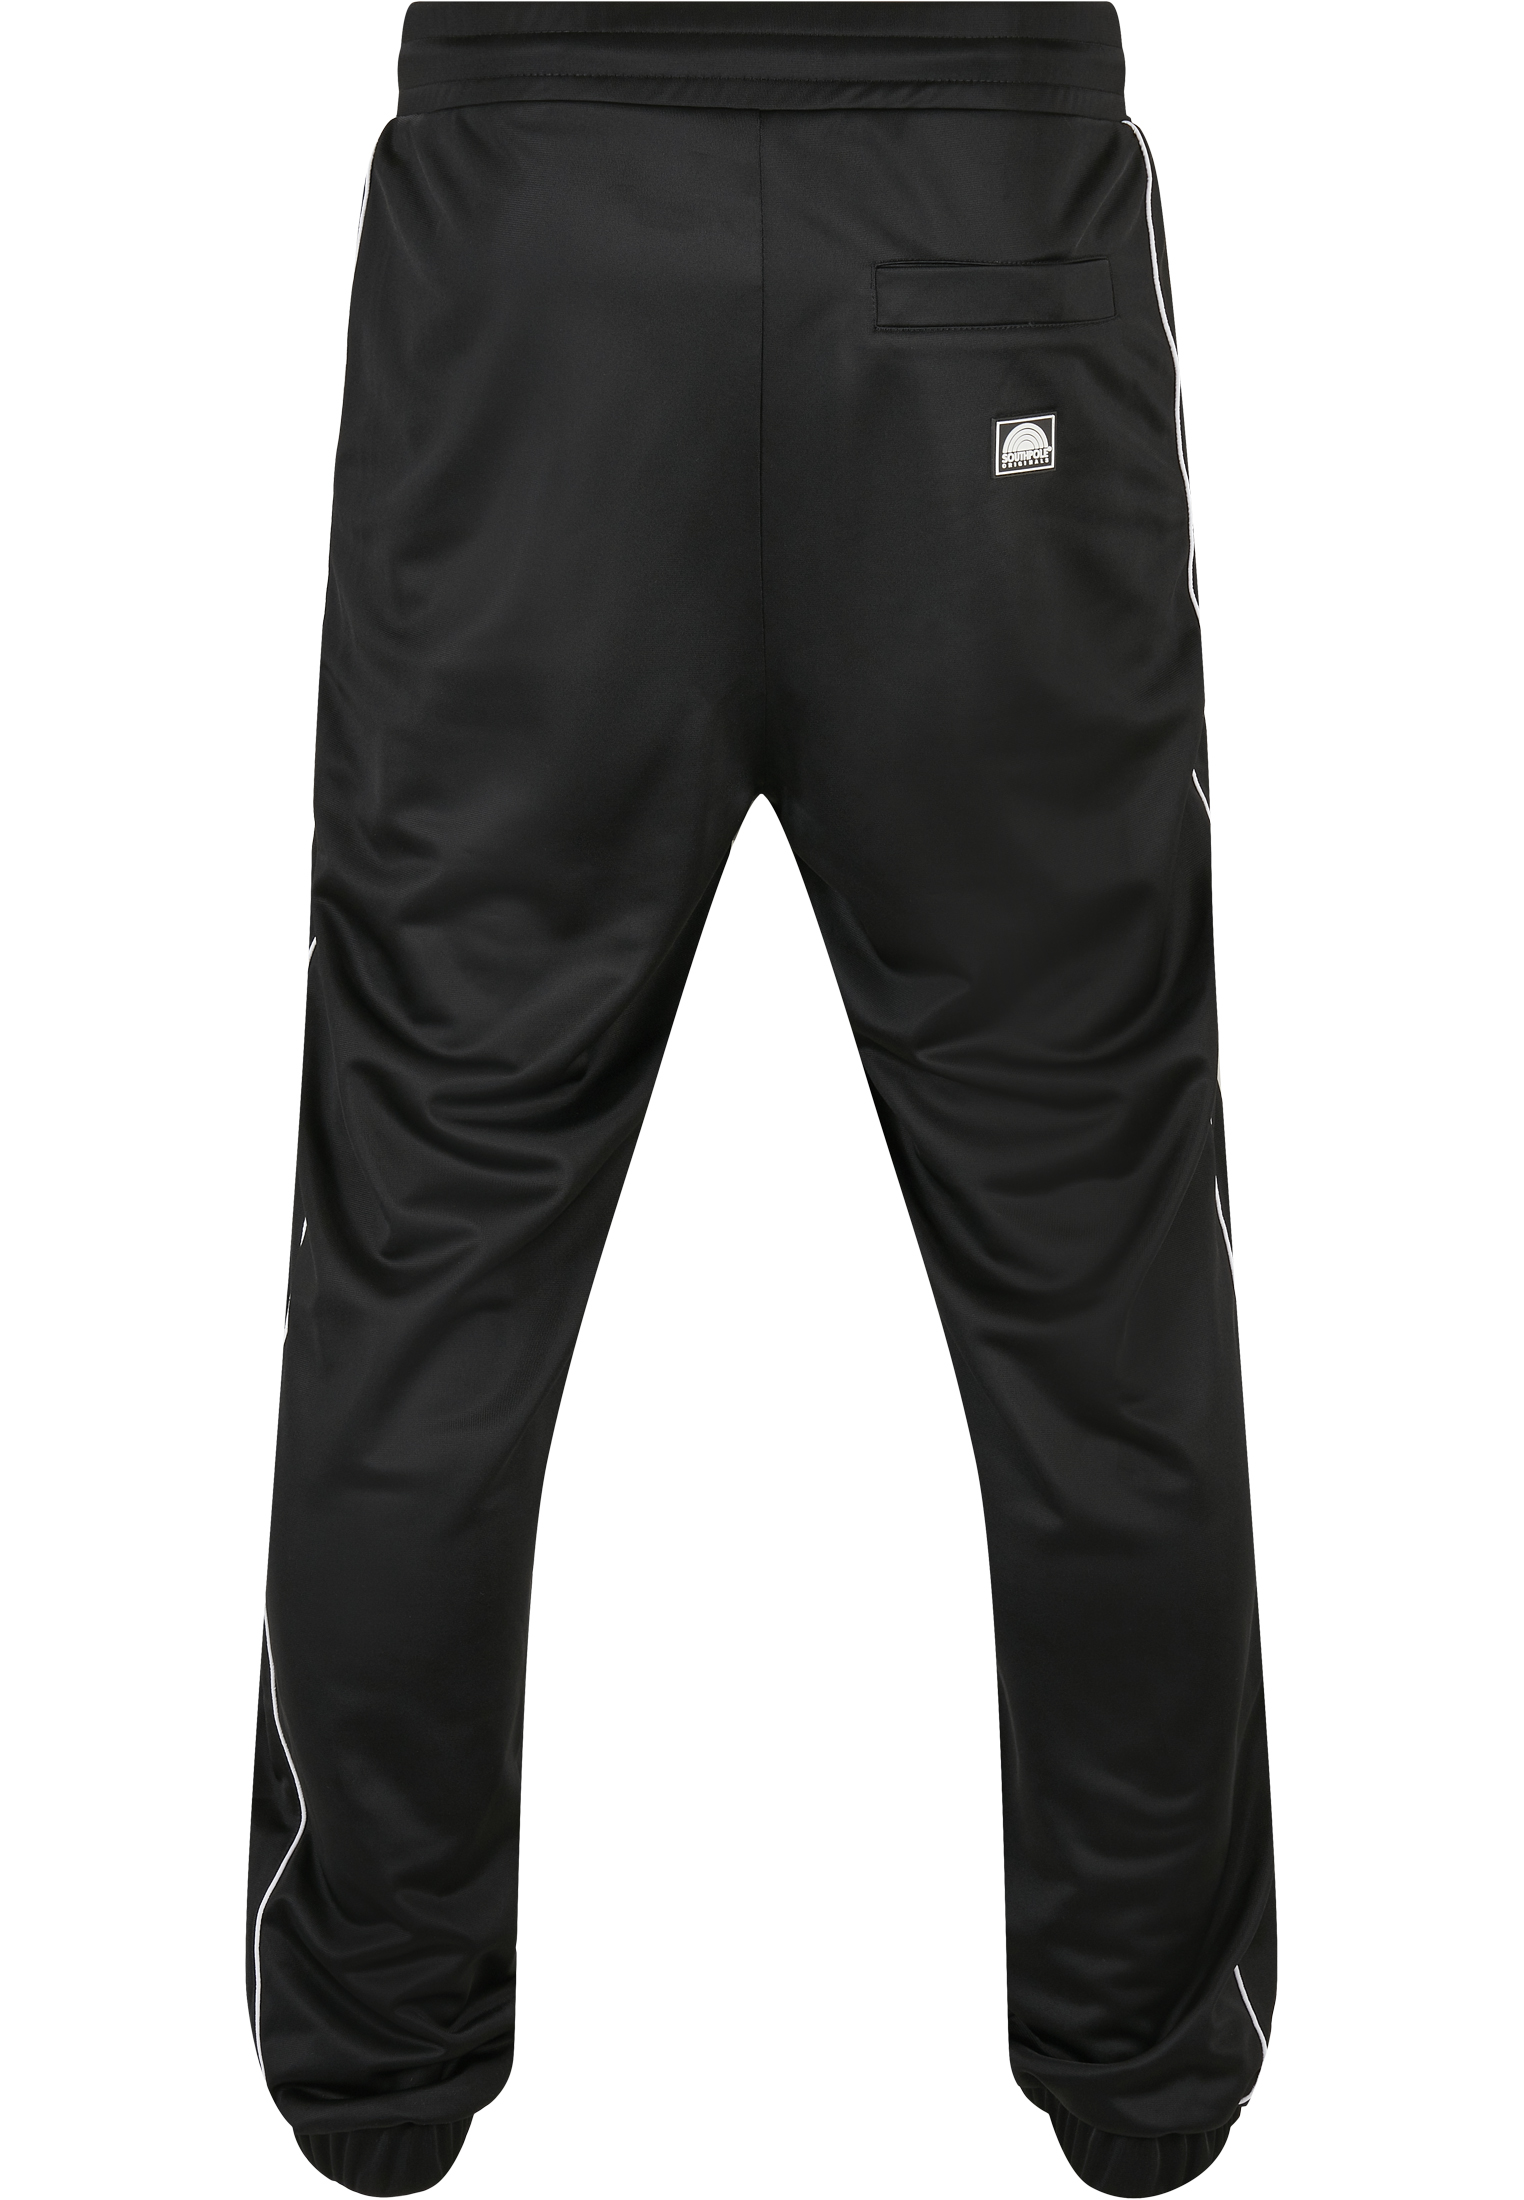 Saisonware Southpole Tricot Pants in Farbe black